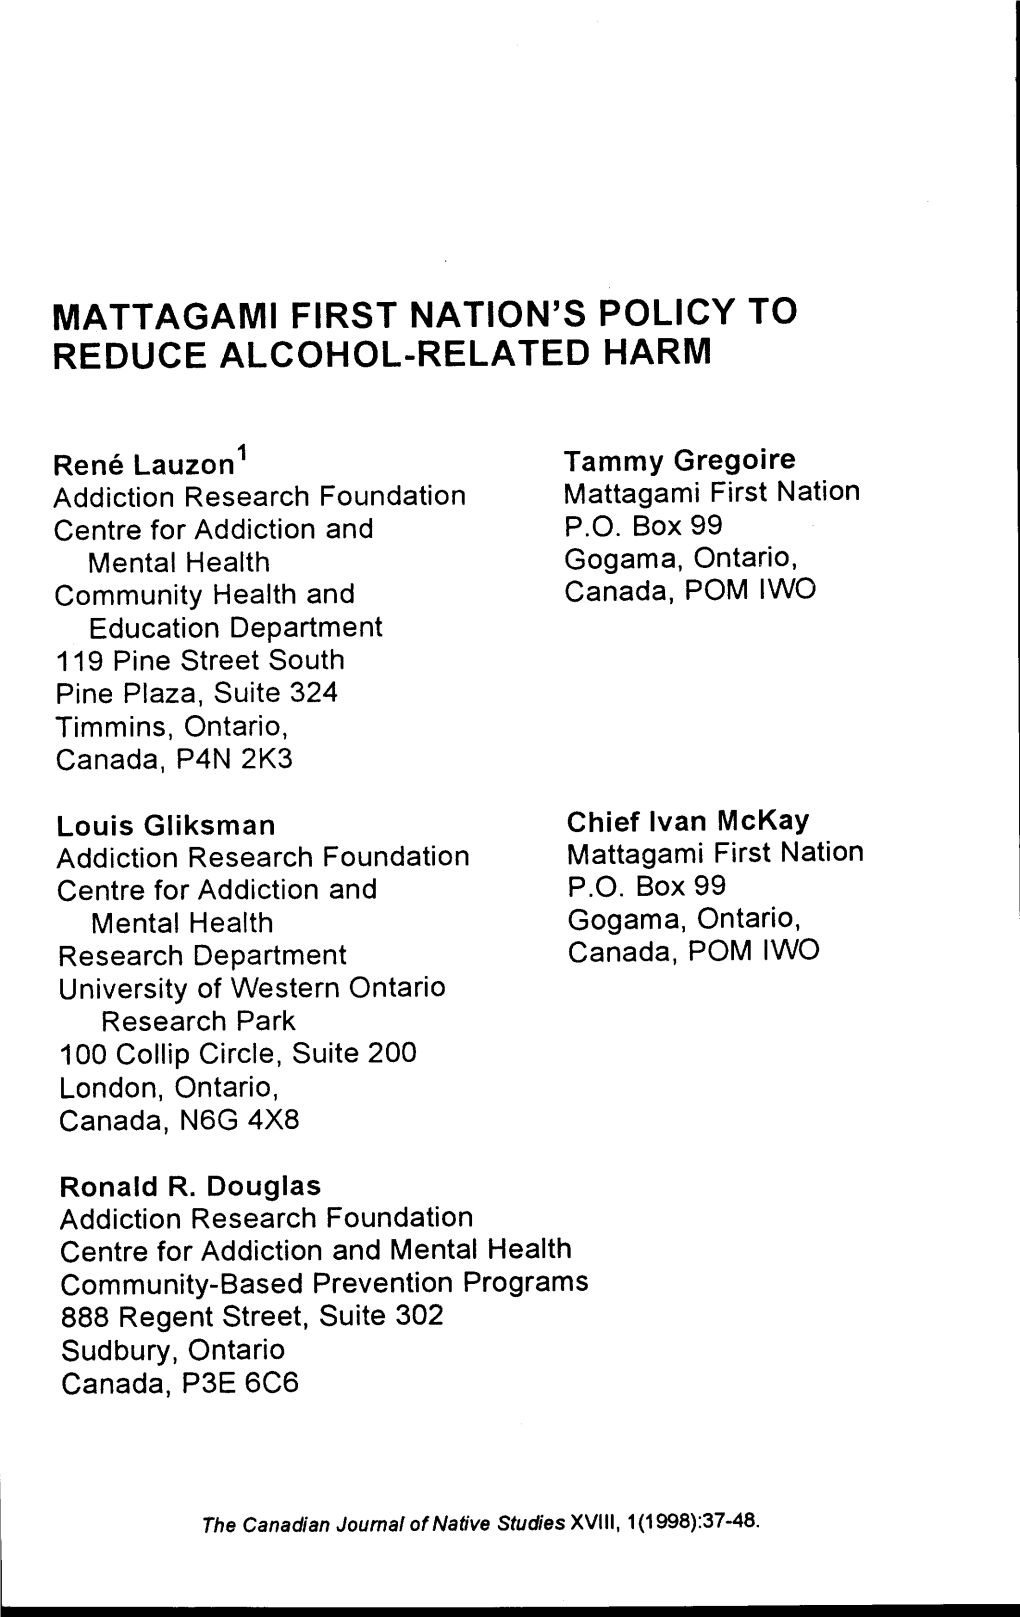 Mattagami First Nation's Policy to Reduce Alcohol-Related Harm